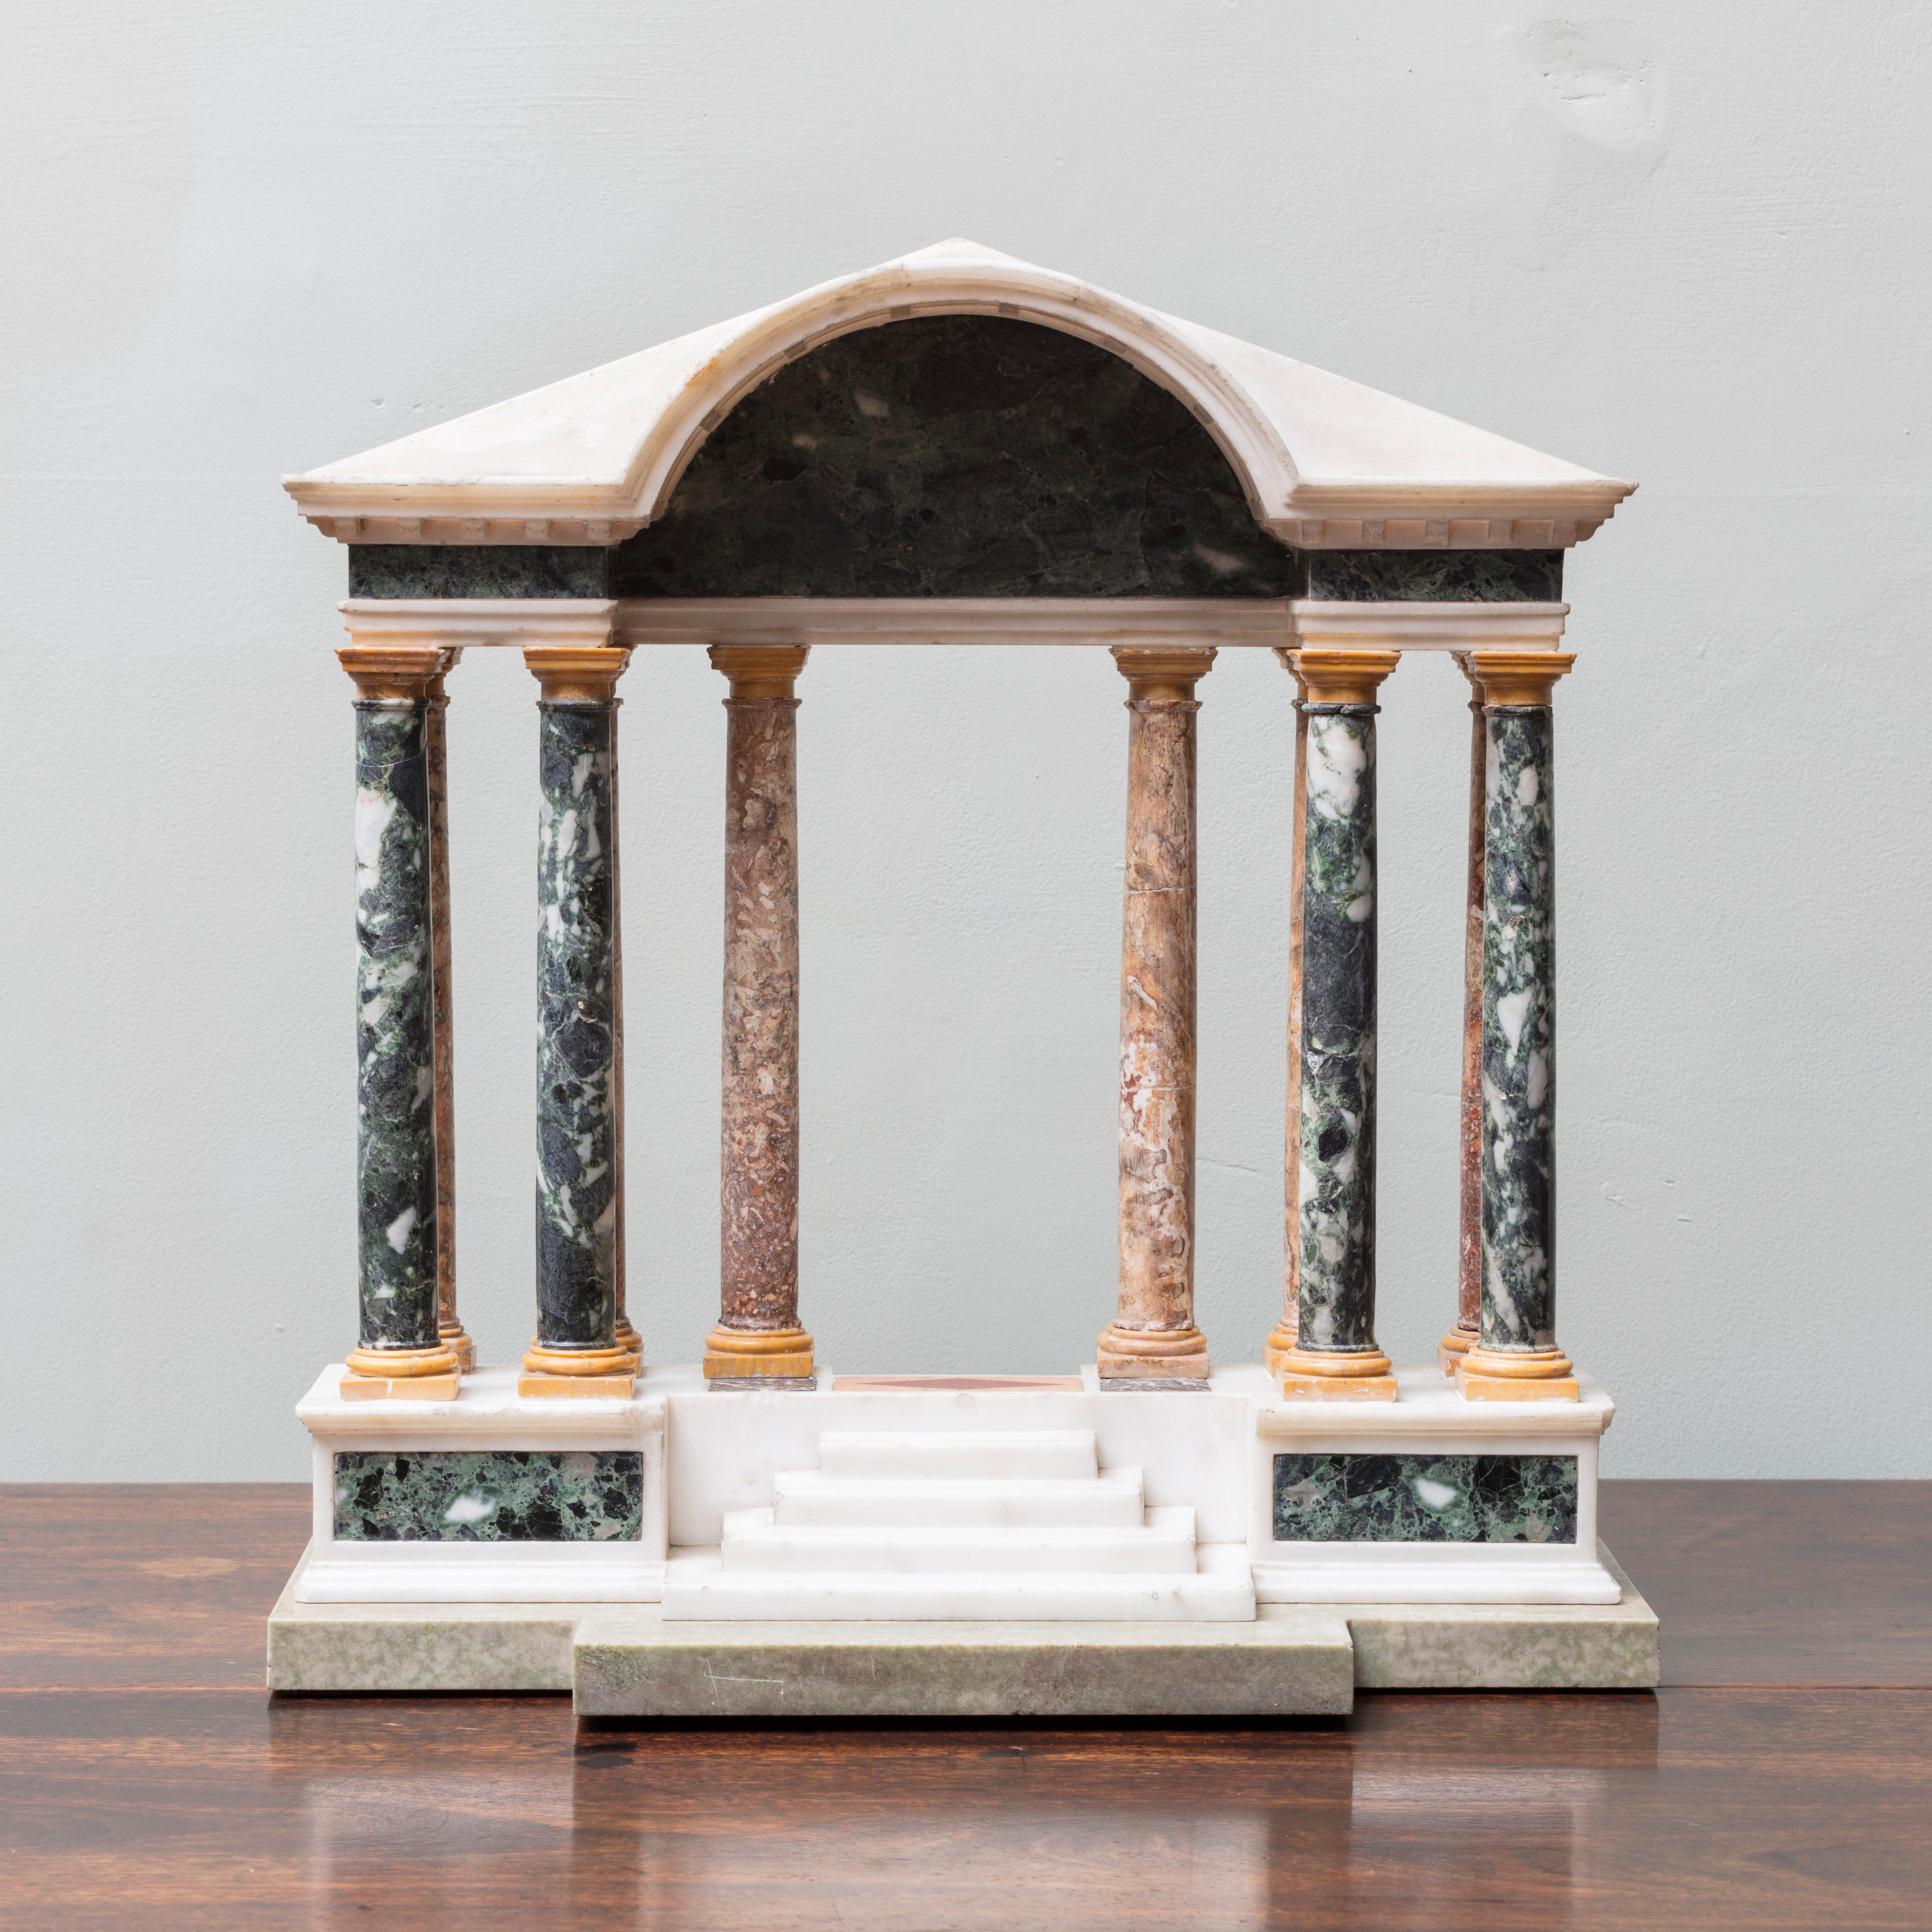 A finely detailed late 18th, early 19th century Grand Tour model of a Palladian Portico. Incorporating numerous well chosen marbles, including Statuary, Verde Antico, Sienna, Duquesa Rosa, Nero Marquina, and Swedish green. Italian, circa 1800.